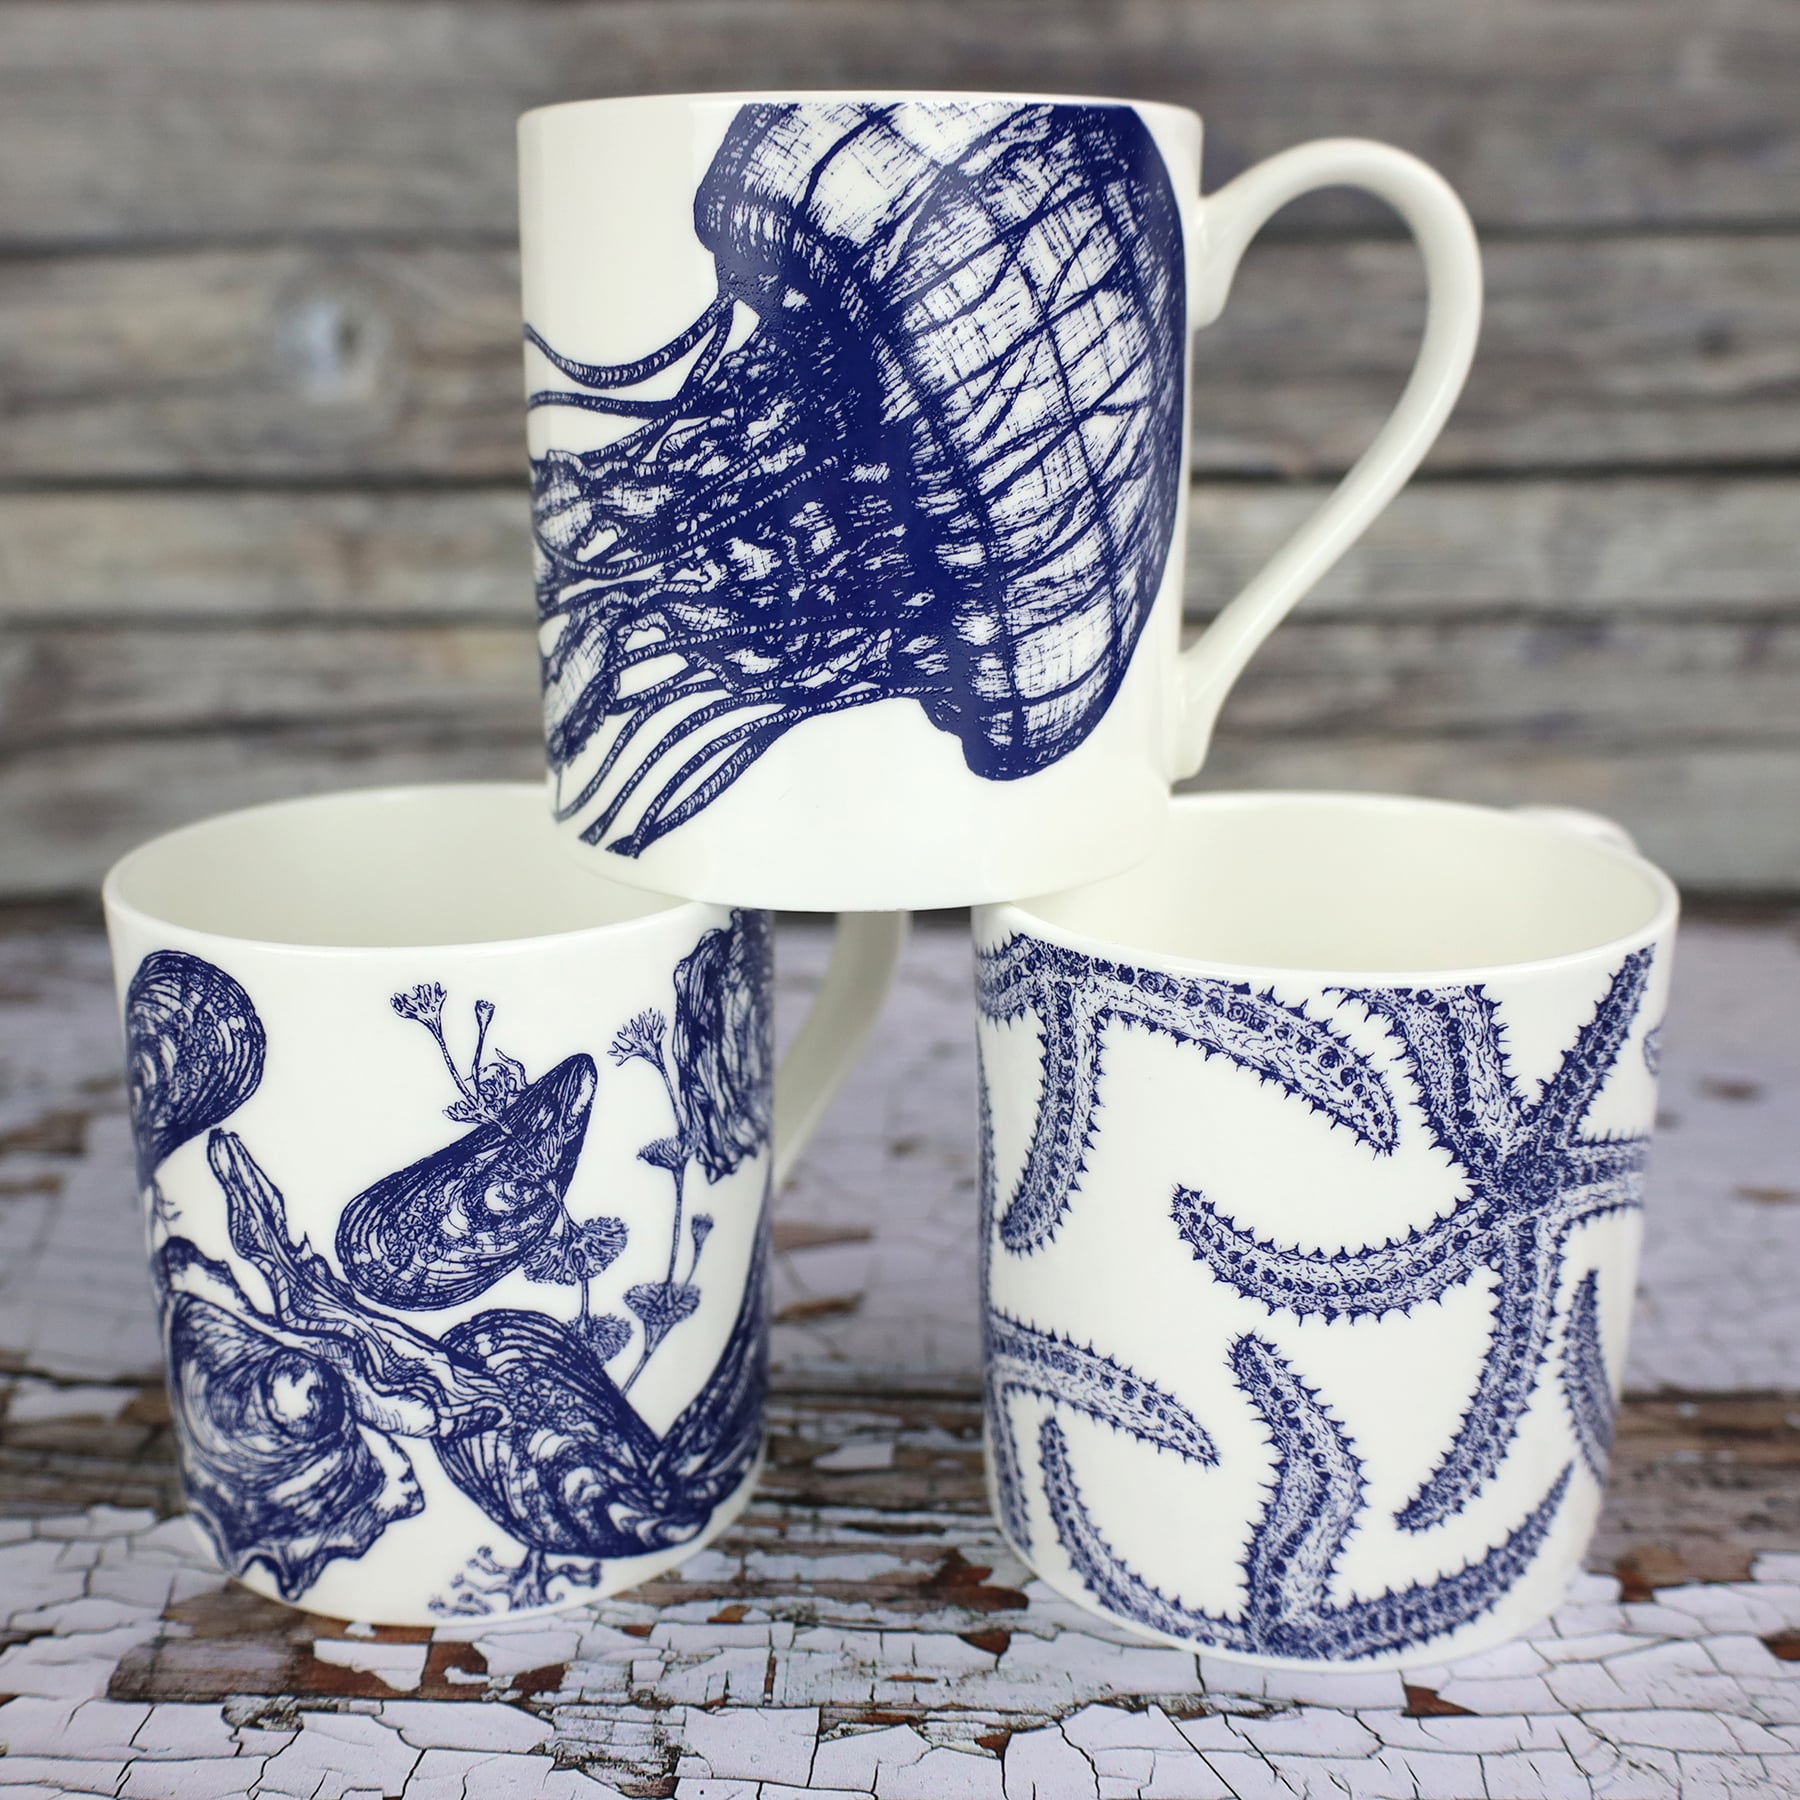 The photo shows Bone china white mug featuring hand drawn jellyfish design in classic Navy stacked  on a starfish mug and a mussel/oyster decorated mug.